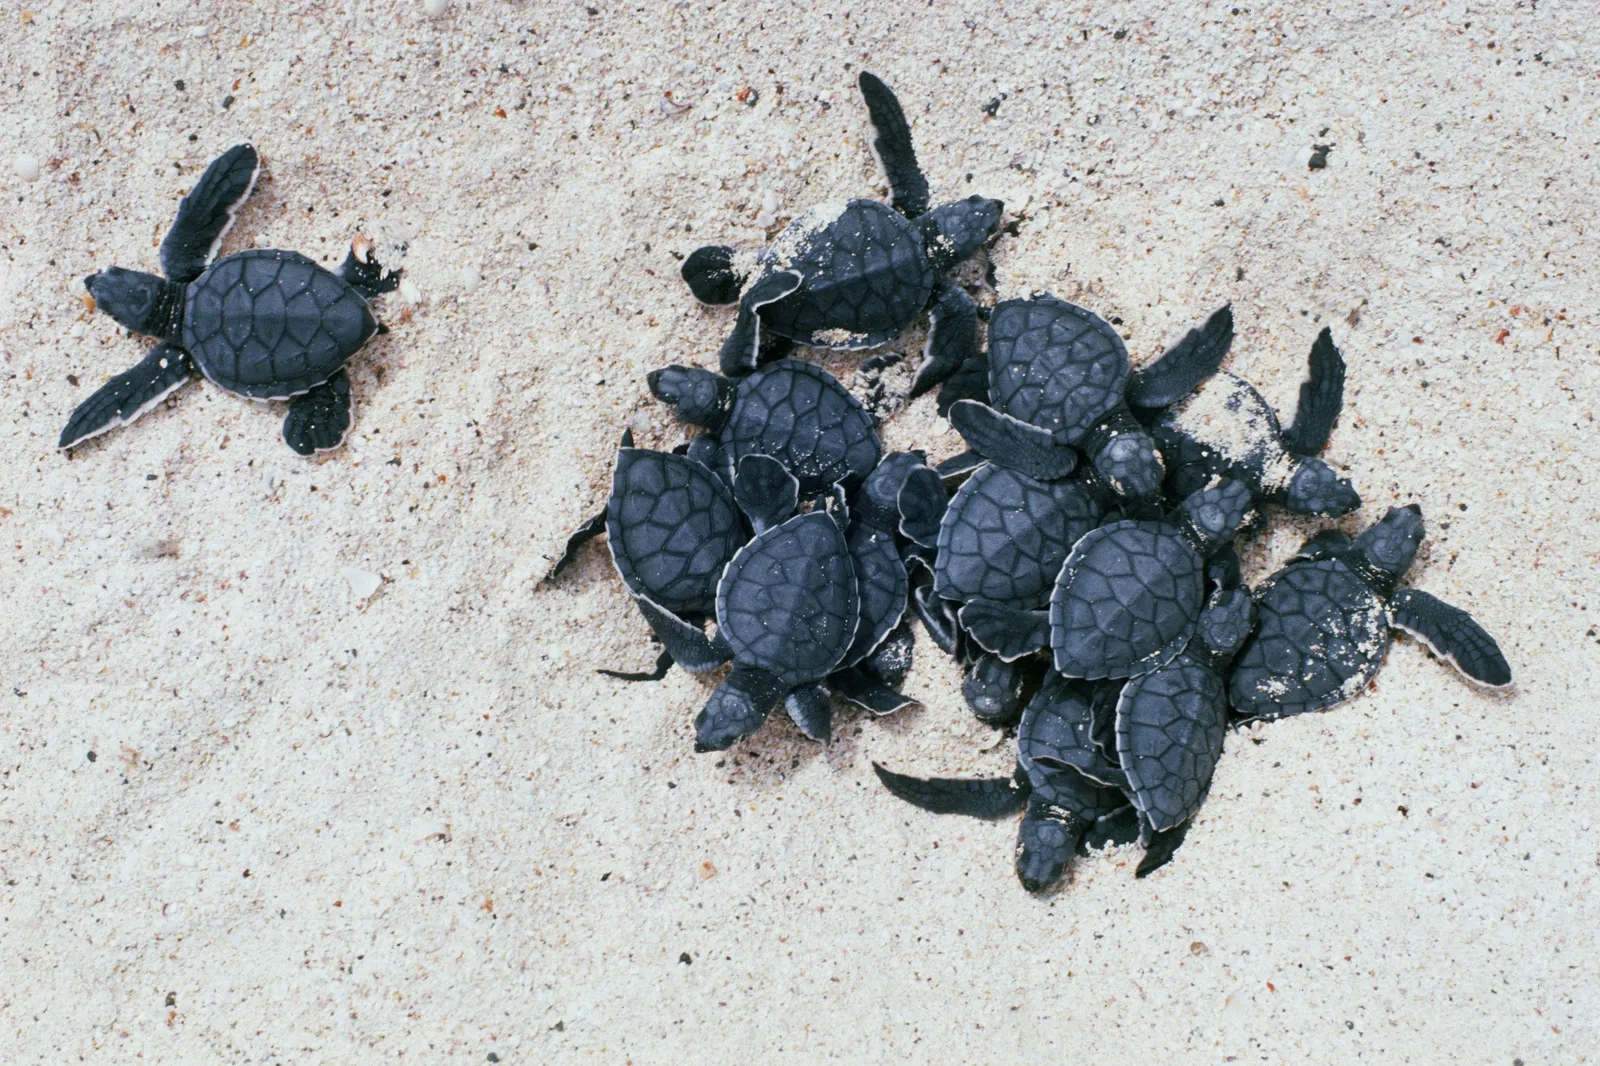 Baby Turtles Coordinate Hatching By Talking to One Another Through Their  Egg Shells | Smart News| Smithsonian Magazine